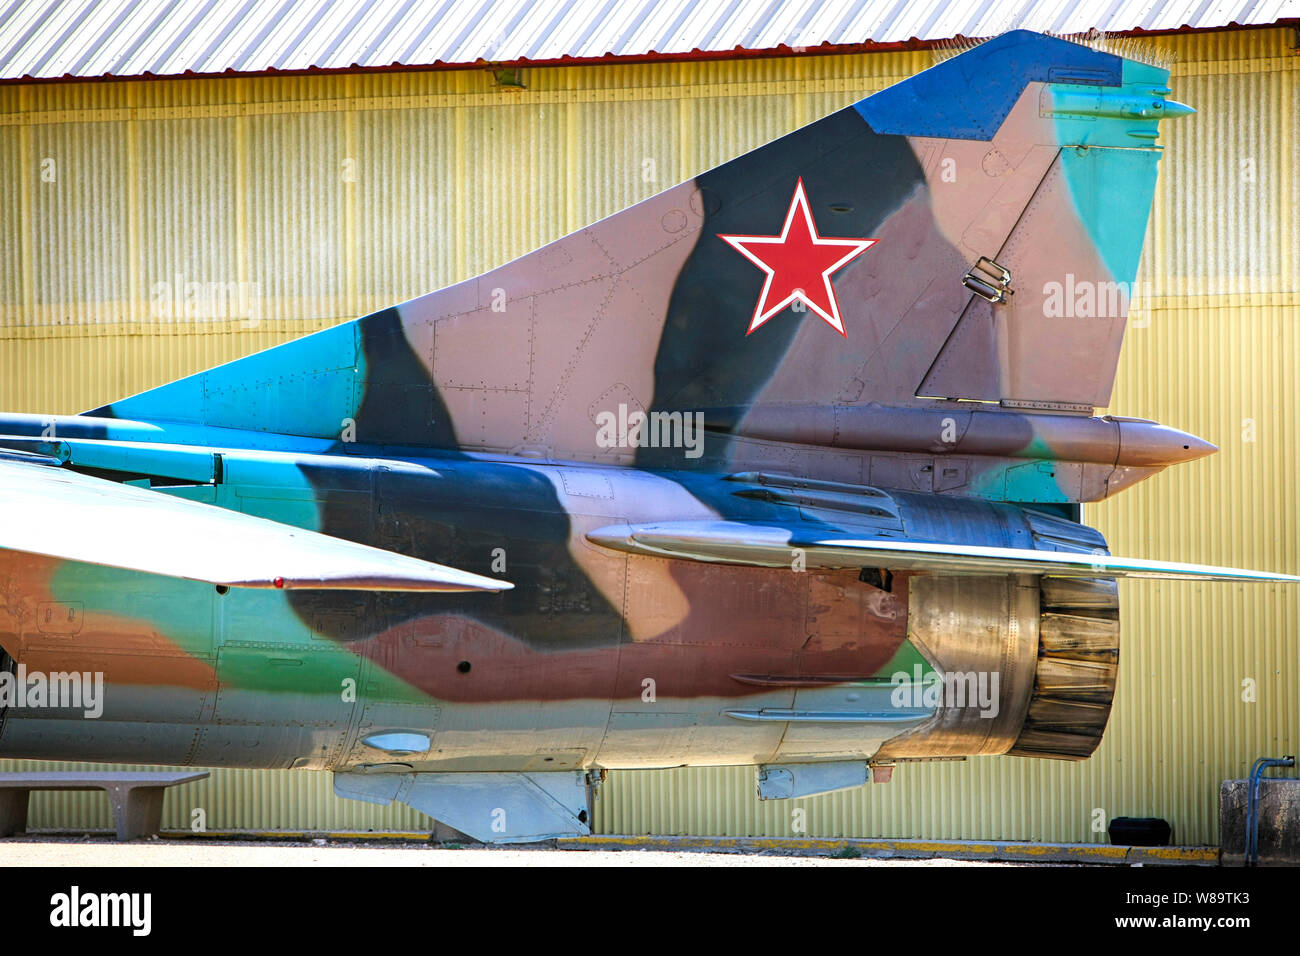 MIG 23 'Flogger' Russian fighter plane on display at the Pima Air & Space Museum in Tucson AZ Stock Photo